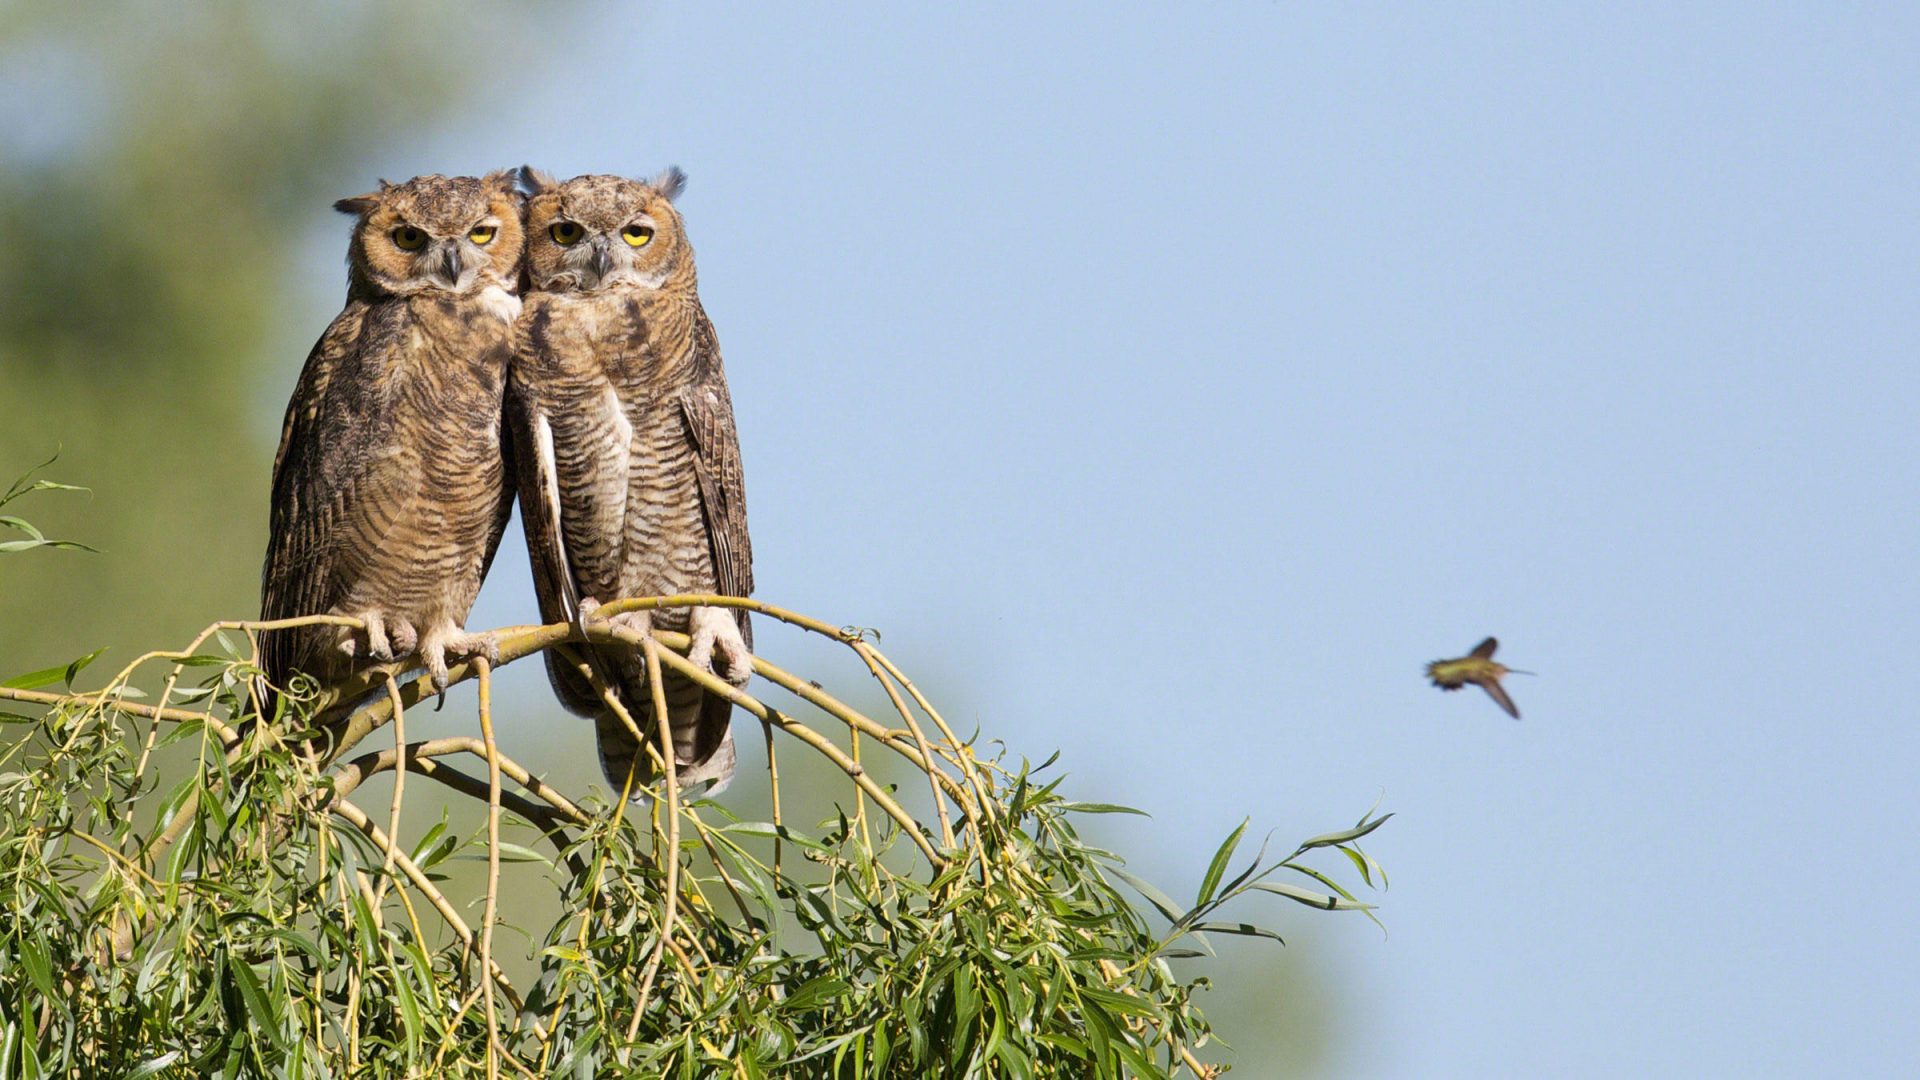 Two Owls on a branch